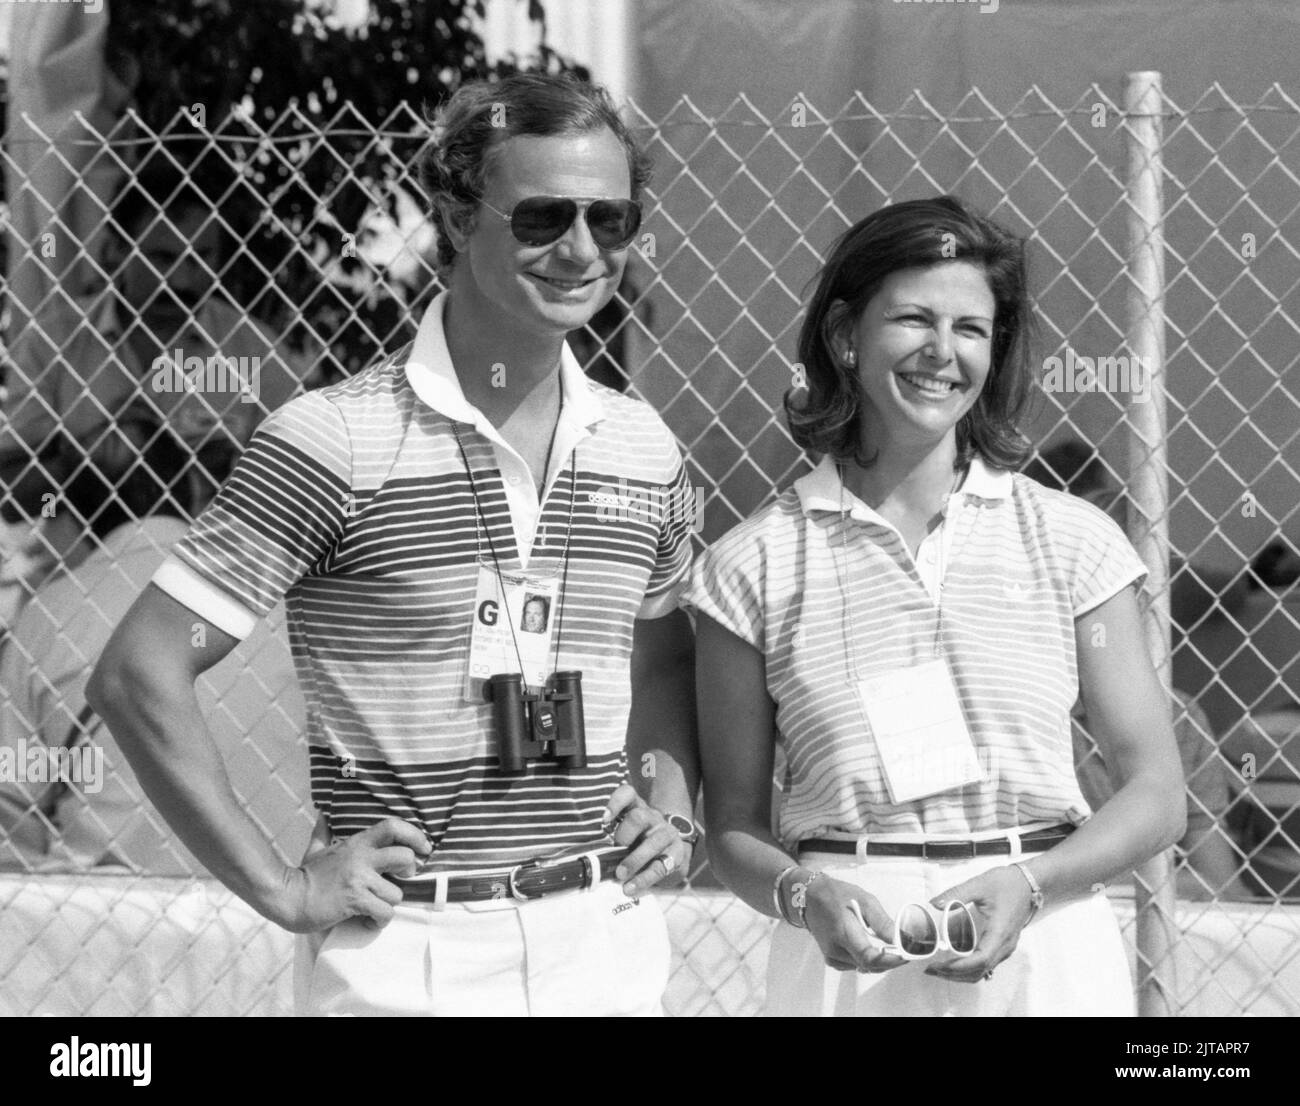 OLYMPIC SUMMER GAMES IN LOS ANGELES 1984SWEDISH ROYAL COUPLE at the Canoe Stadium to cheers Swedish athletes succes Stock Photo